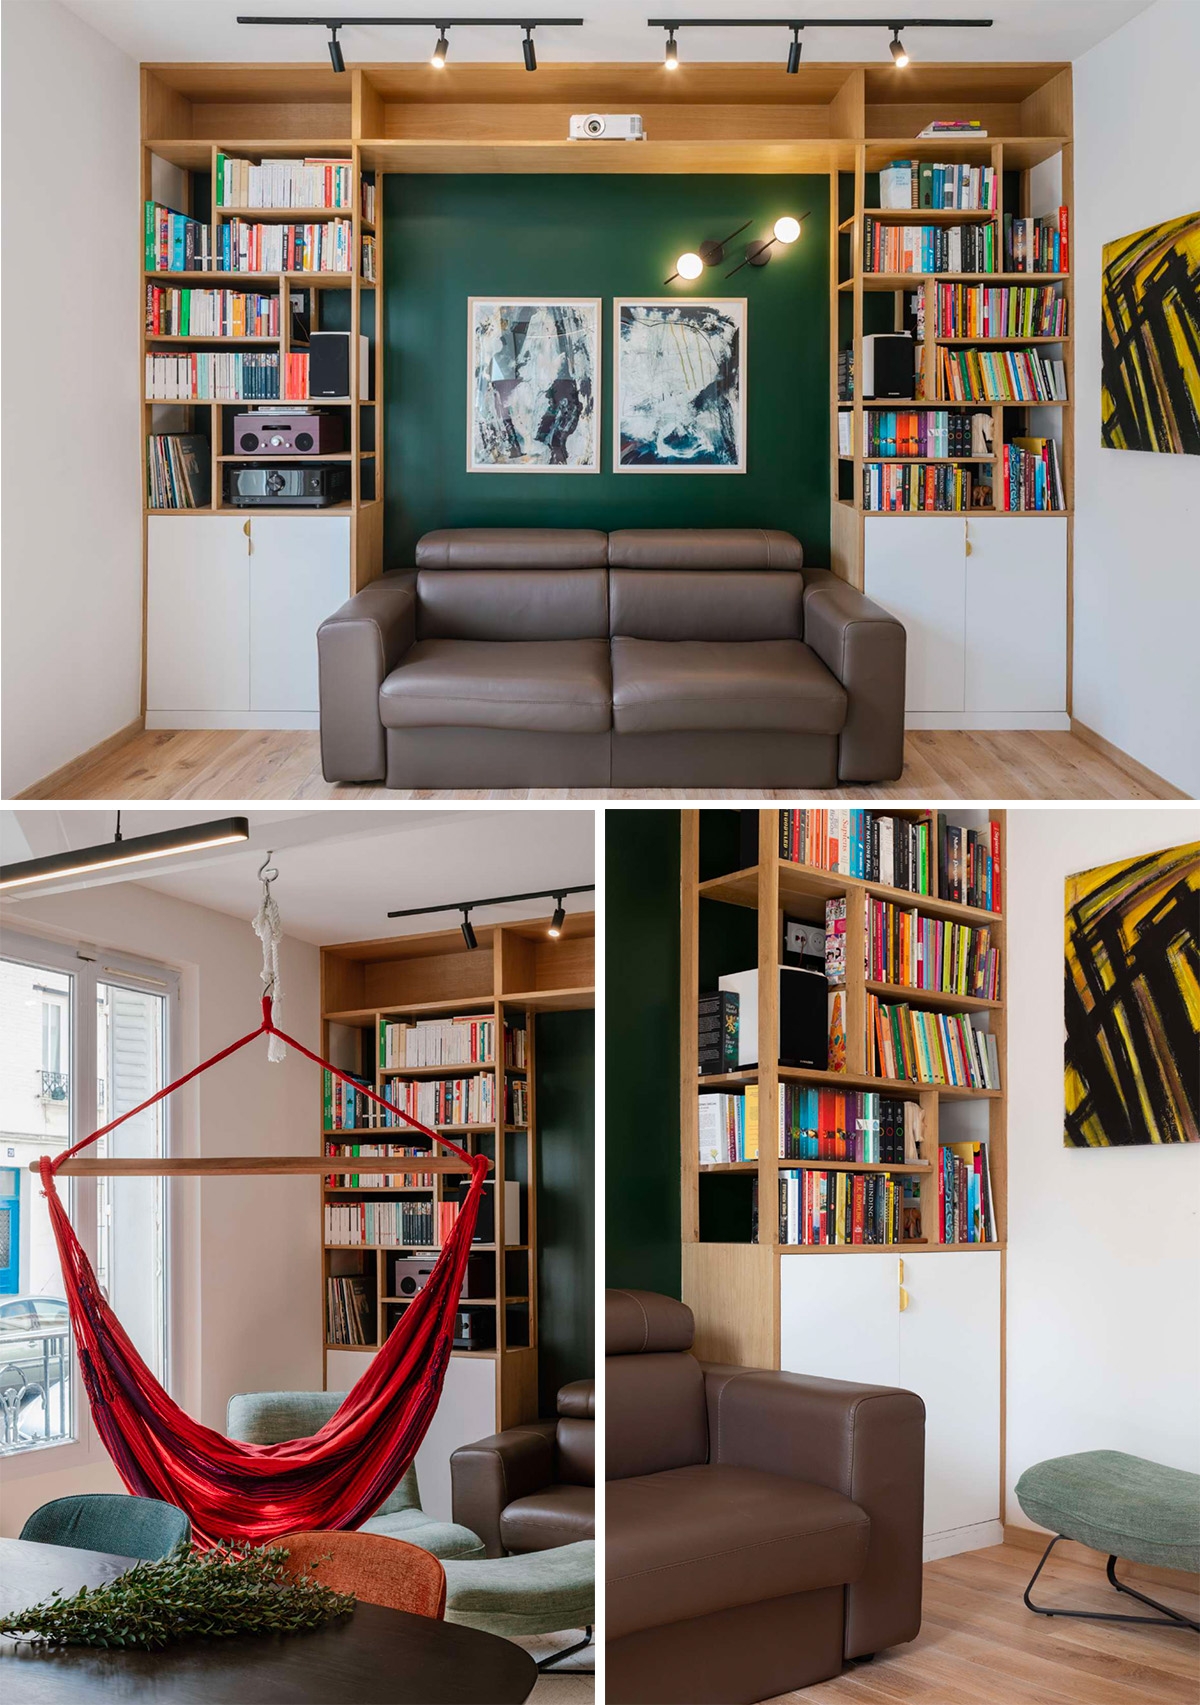 Atelier Varenne imagined a way to make the family’s vast collection of books find their place amidst an architecture of contrasting forms and simplicity of materials